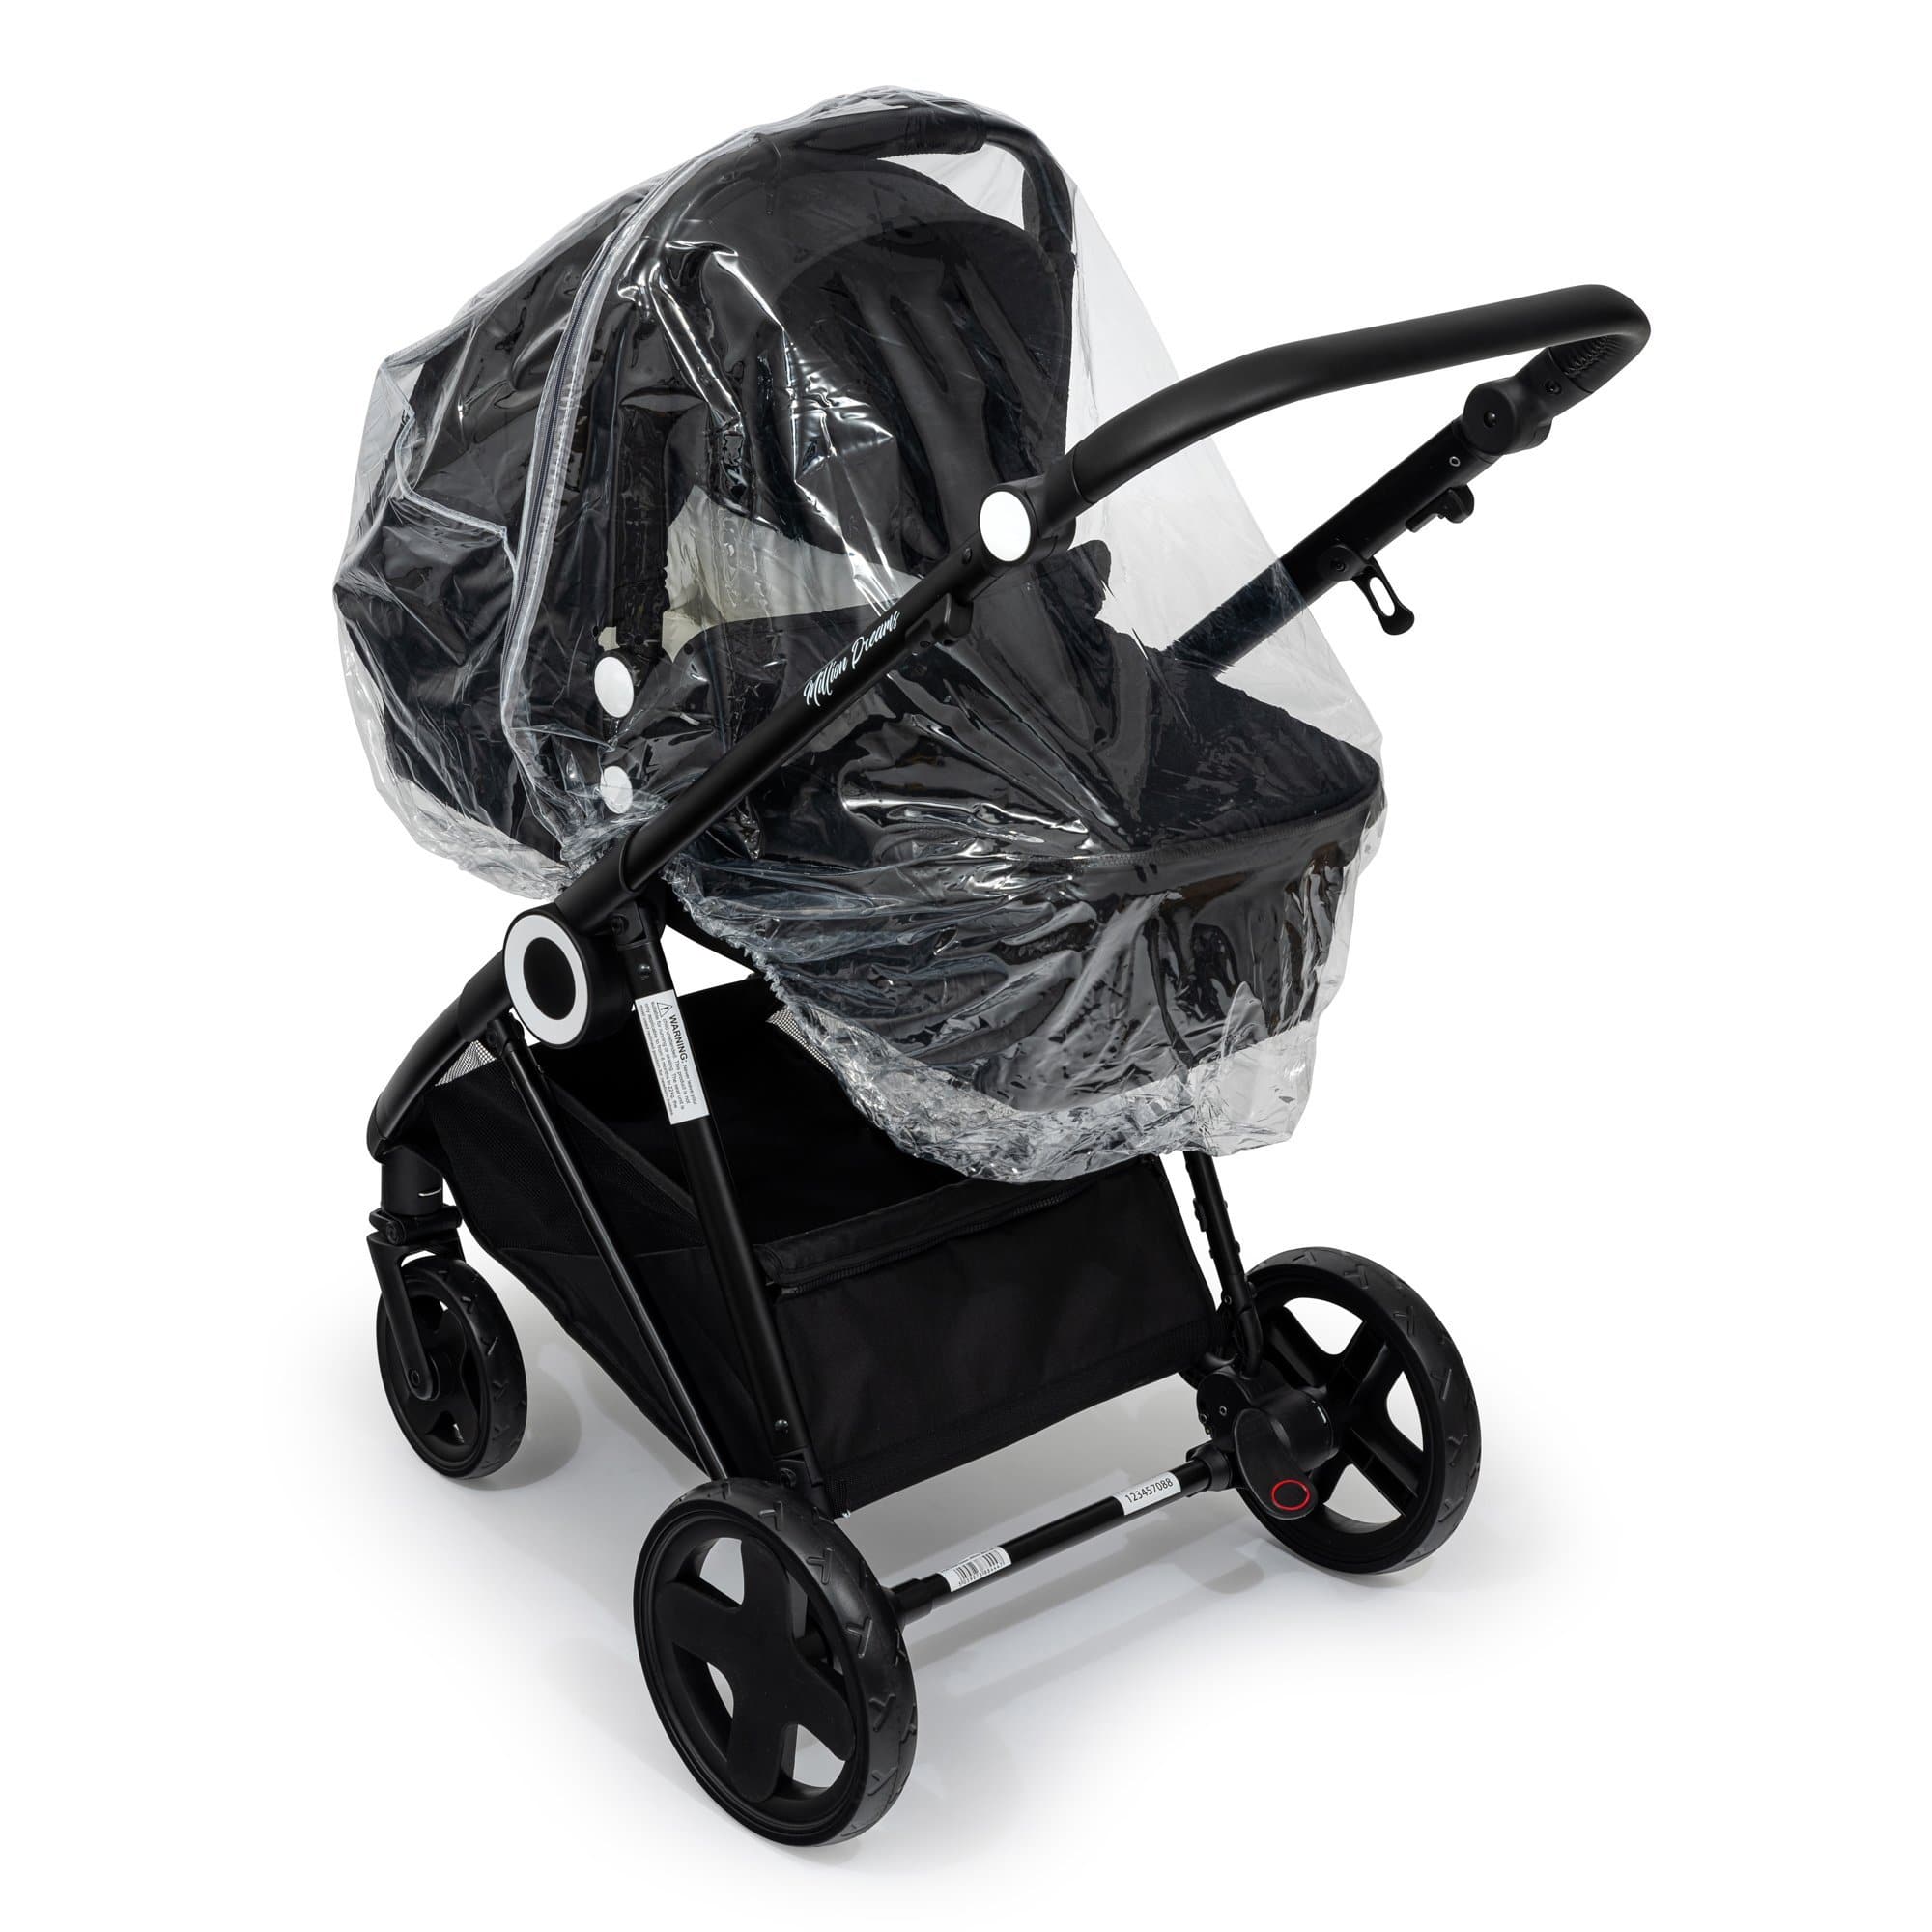 2 in 1 Rain Cover Compatible with XTS - Fits All Models - For Your Little One